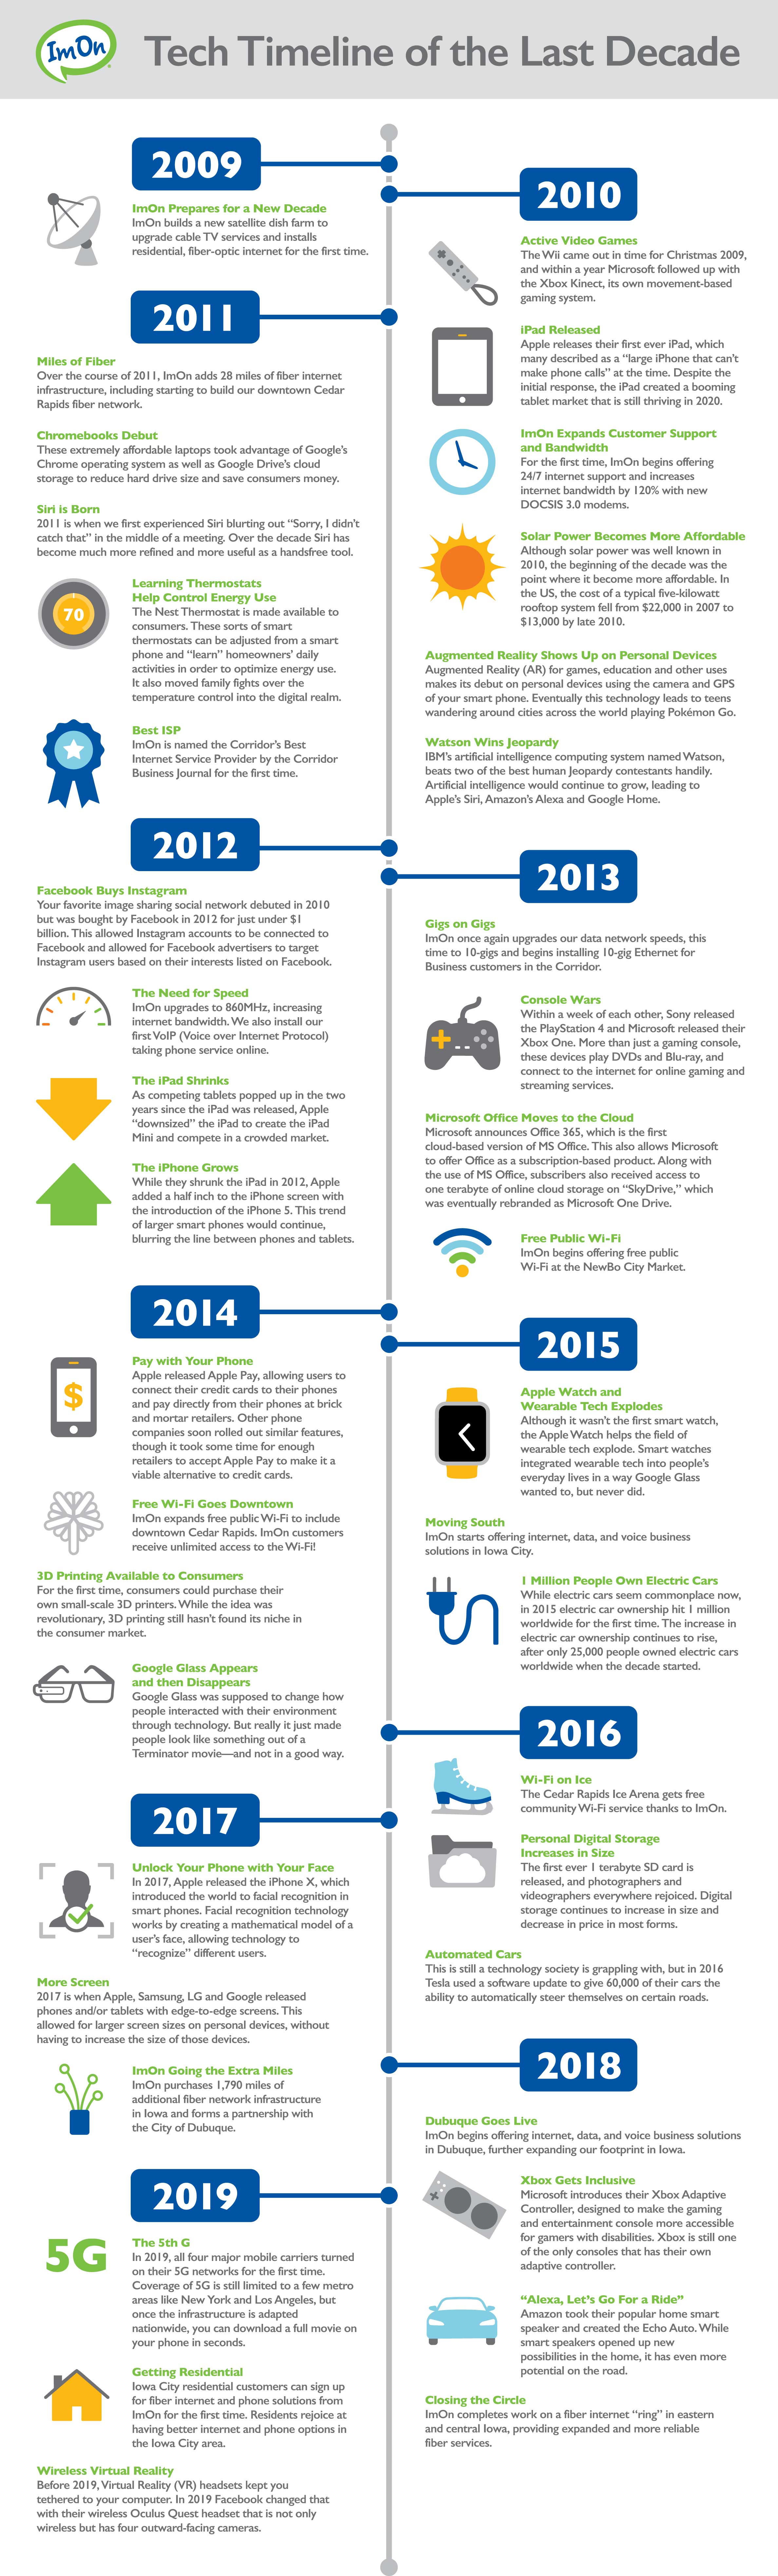 Technology timeline for the last decade image